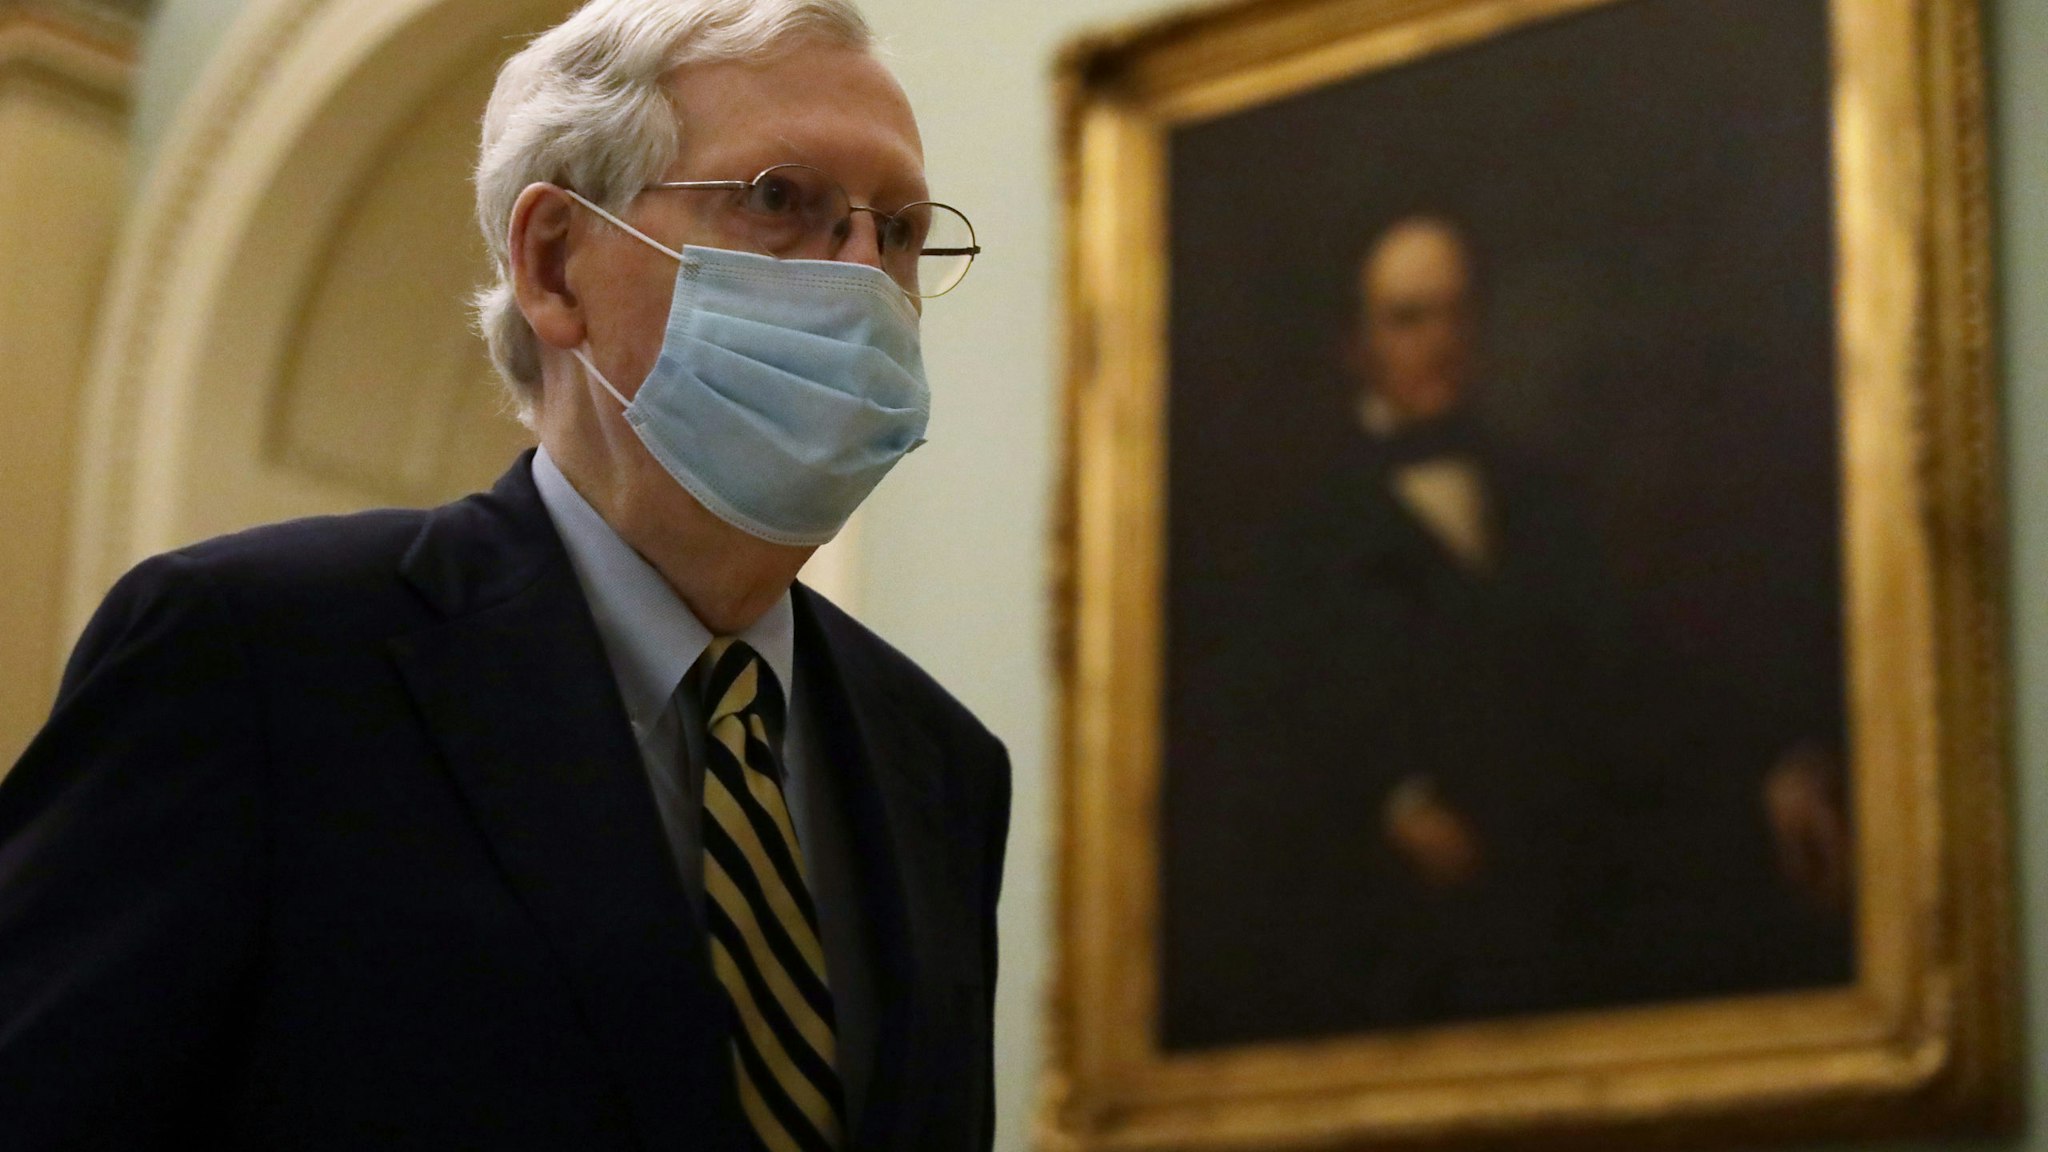 WASHINGTON, DC - MAY 11: U.S. Senate Majority Leader Sen. Mitch McConnell (R-KY) wears a mask as he walks through a hallway at the U.S. Capitol May 11, 2020 in Washington, DC. The Senate is back in session for the second week after a pause due to the COVID-19 outbreak. (Photo by Alex Wong/Getty Images)WASHINGTON, DC - MAY 11: U.S. Senate Majority Leader Sen. Mitch McConnell (R-KY) wears a mask as he walks through a hallway at the U.S. Capitol May 11, 2020 in Washington, DC. The Senate is back in session for the second week after a pause due to the COVID-19 outbreak. (Photo by Alex Wong/Getty Images)